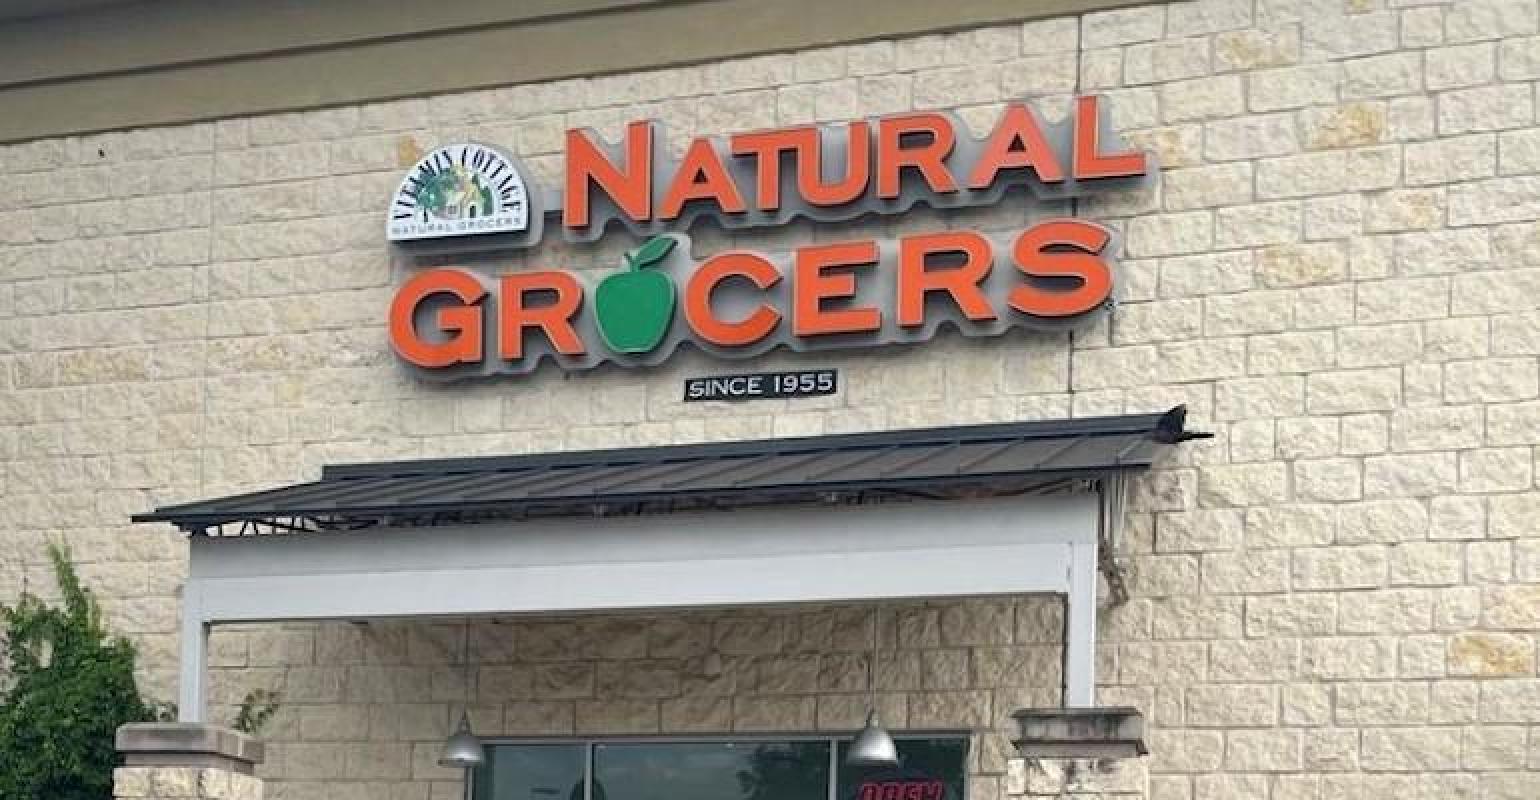 Natural Grocers to launch 67th anniversary promotion Supermarket News